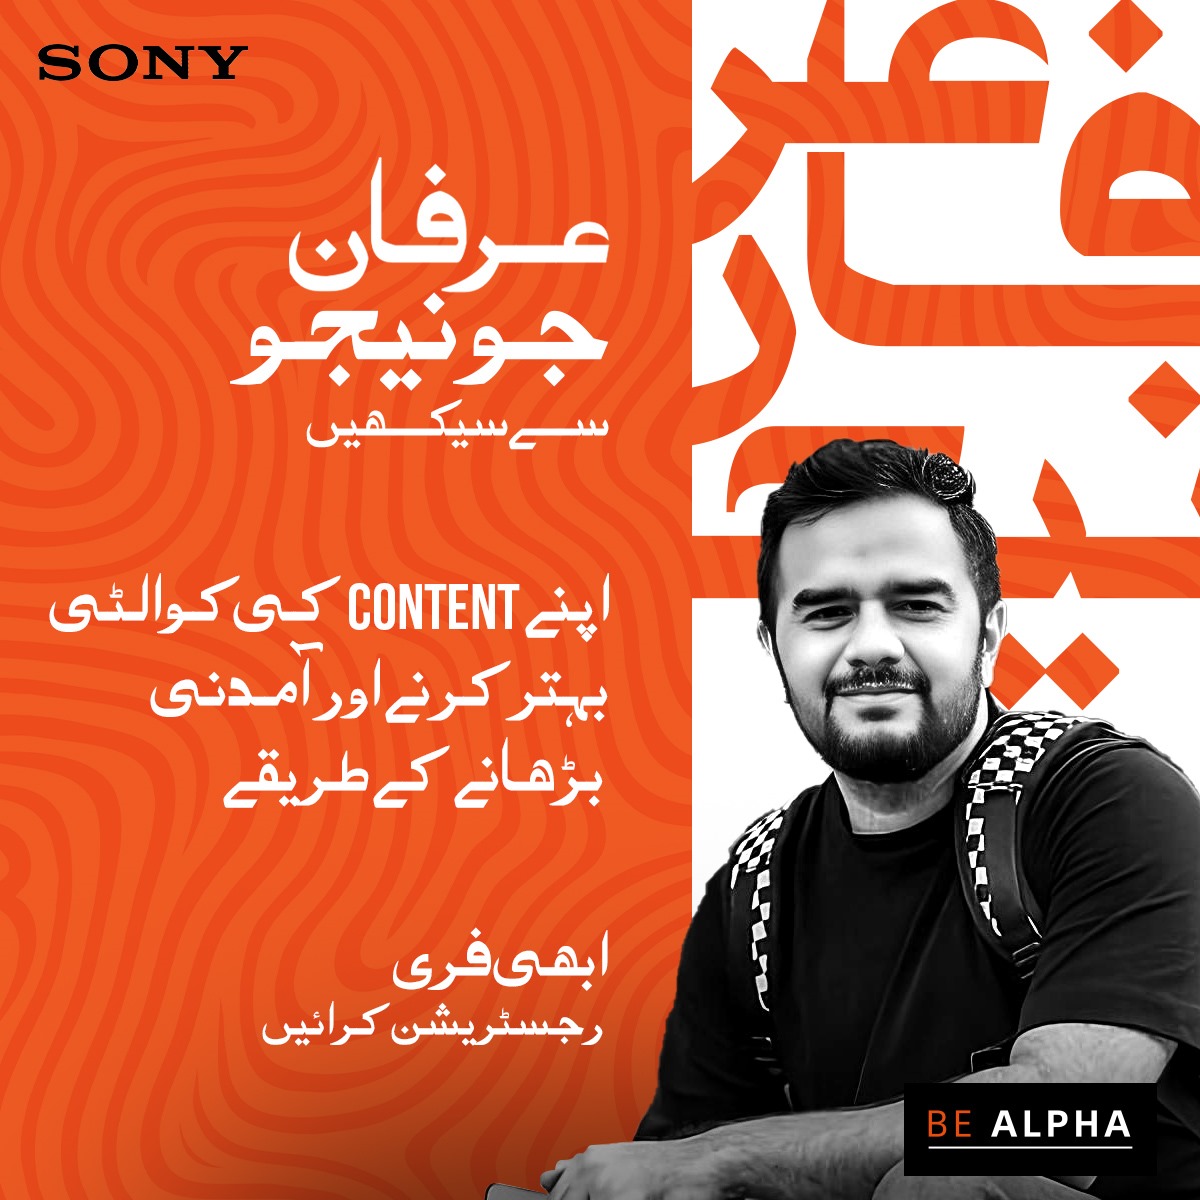 Learn from Irfan Junejo how to improve the video quality of your CONTENT and increase revenue. Register now for free! 👉 Free Register here to get the answer: alphauniverse-mea.com/event/irfan-ju… #SonyMea #BeAlpha #Photography #Videography #IrfanJunejo #contentcreator #contentcreationtips